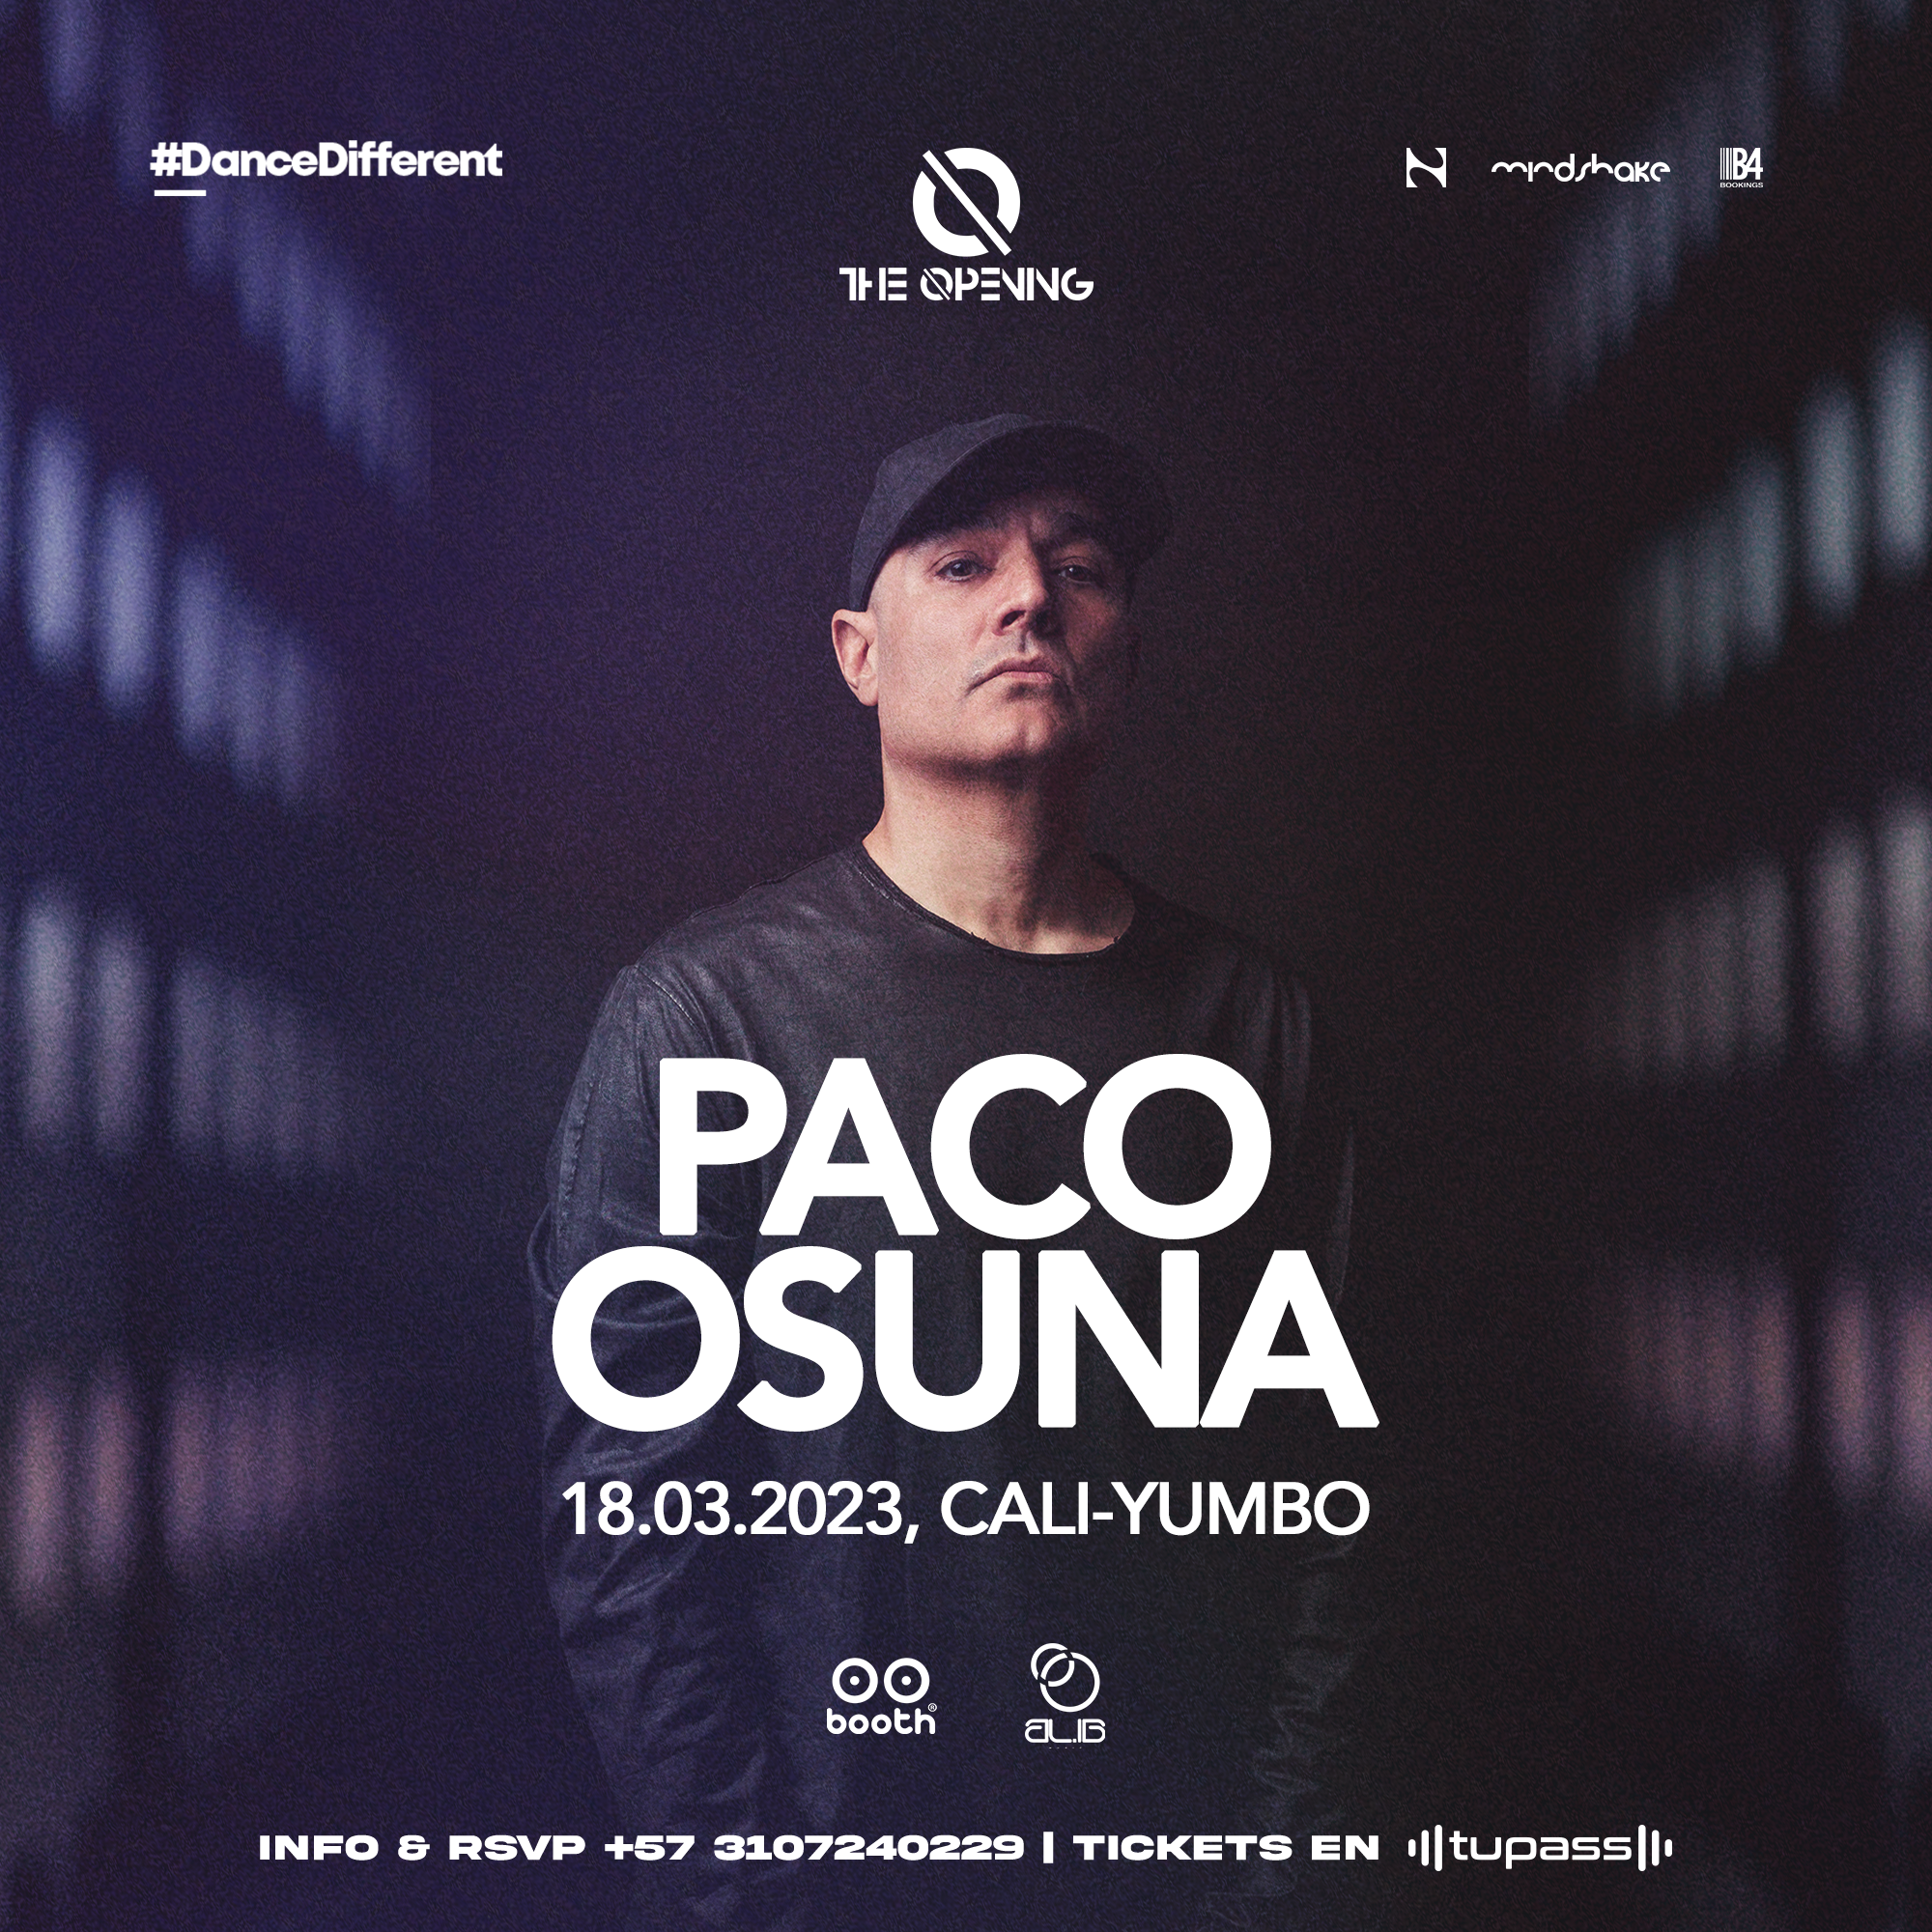 THE OPENING W/ Paco Osuna - フライヤー表